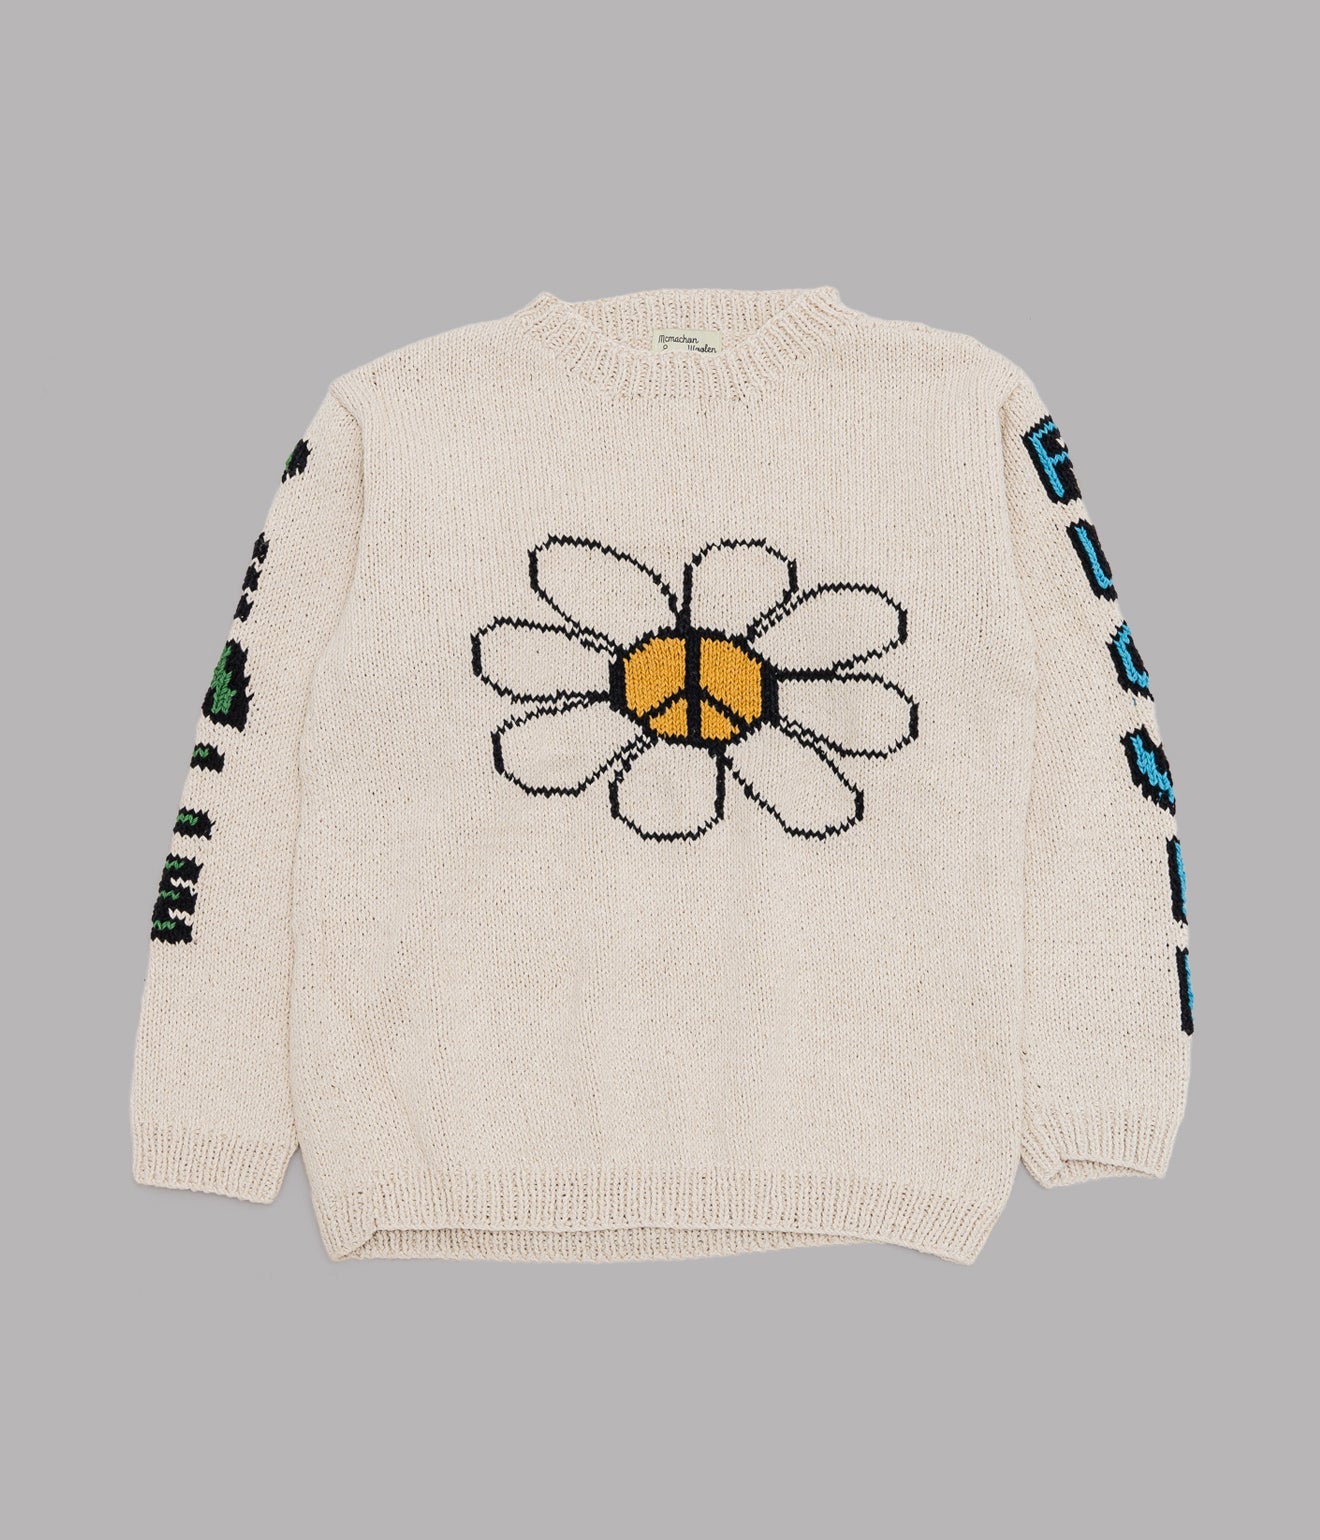 MacMahon Knitting Mills "L/S Crew Neck Knit-Peace&Flower" Natural - WEAREALLANIMALS